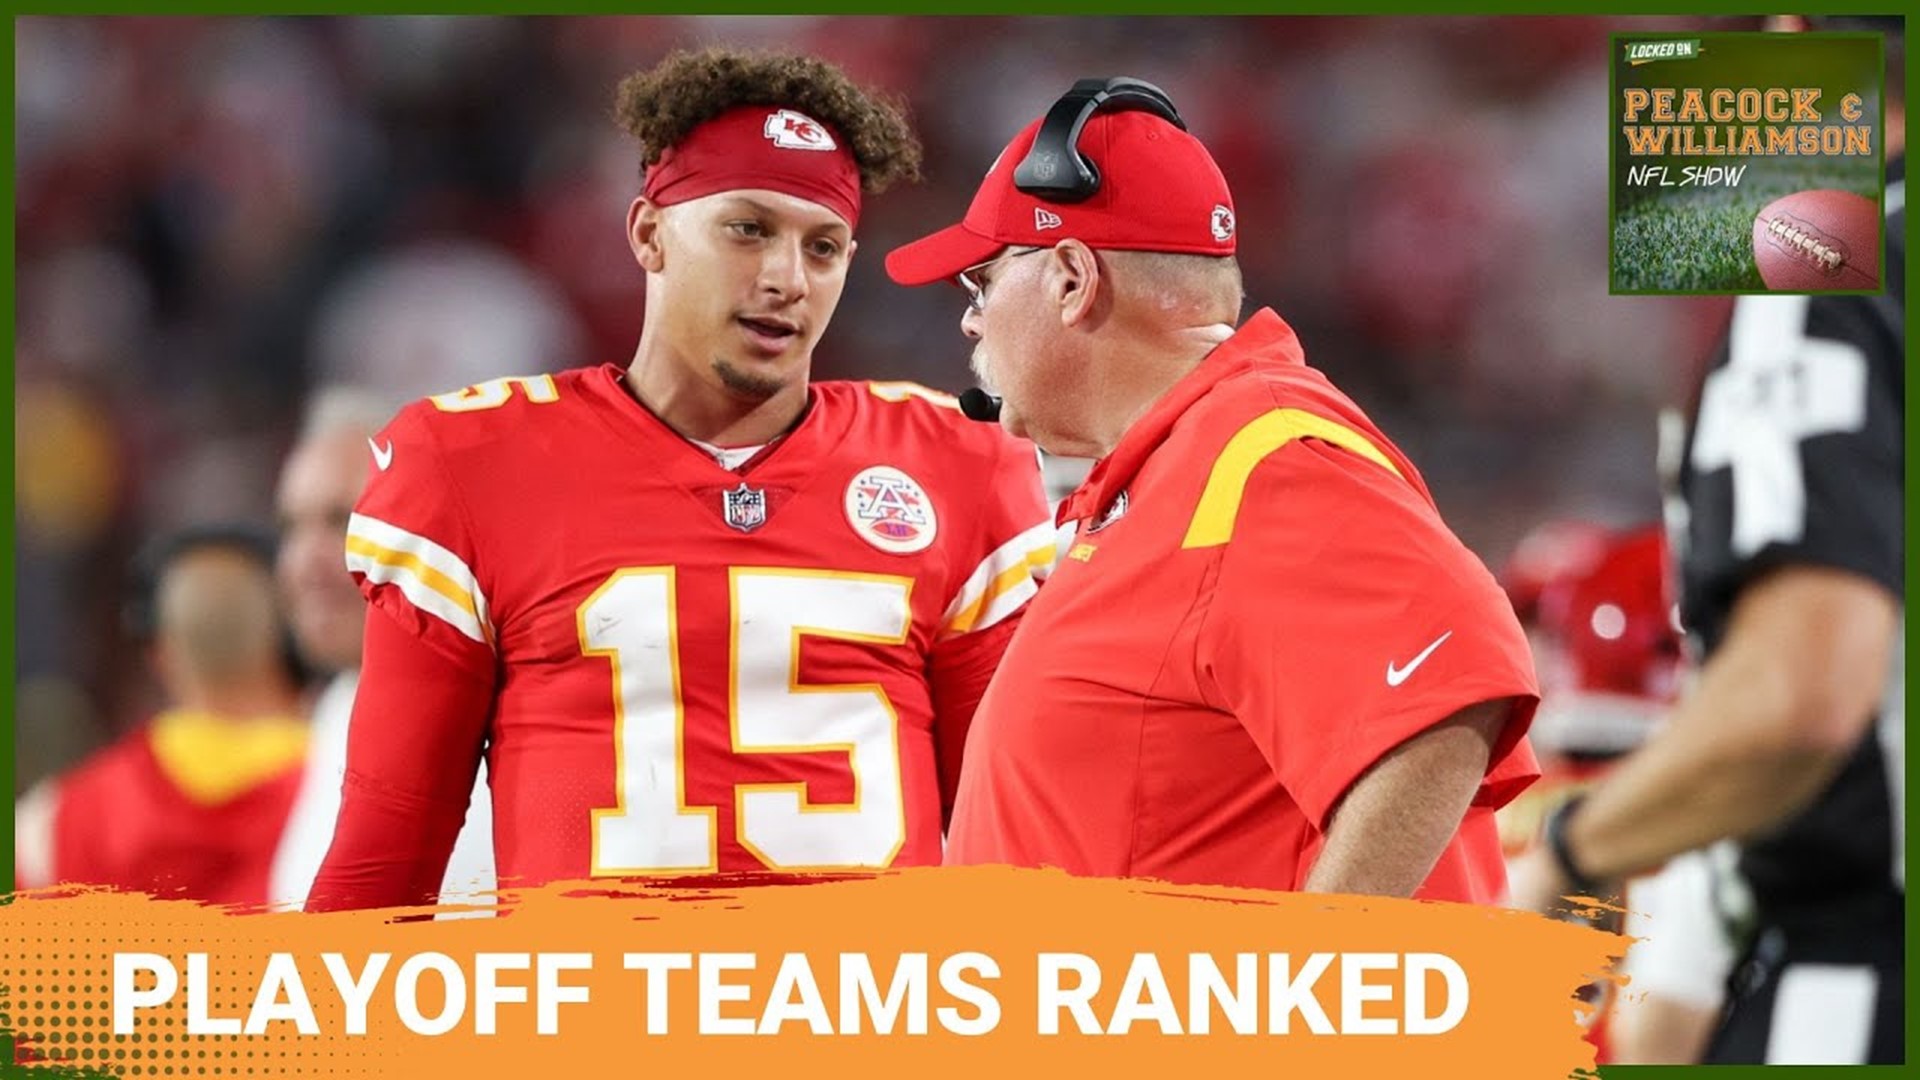 NFL Playoff Teams Ranked by Coach, QB, Defense, and More!